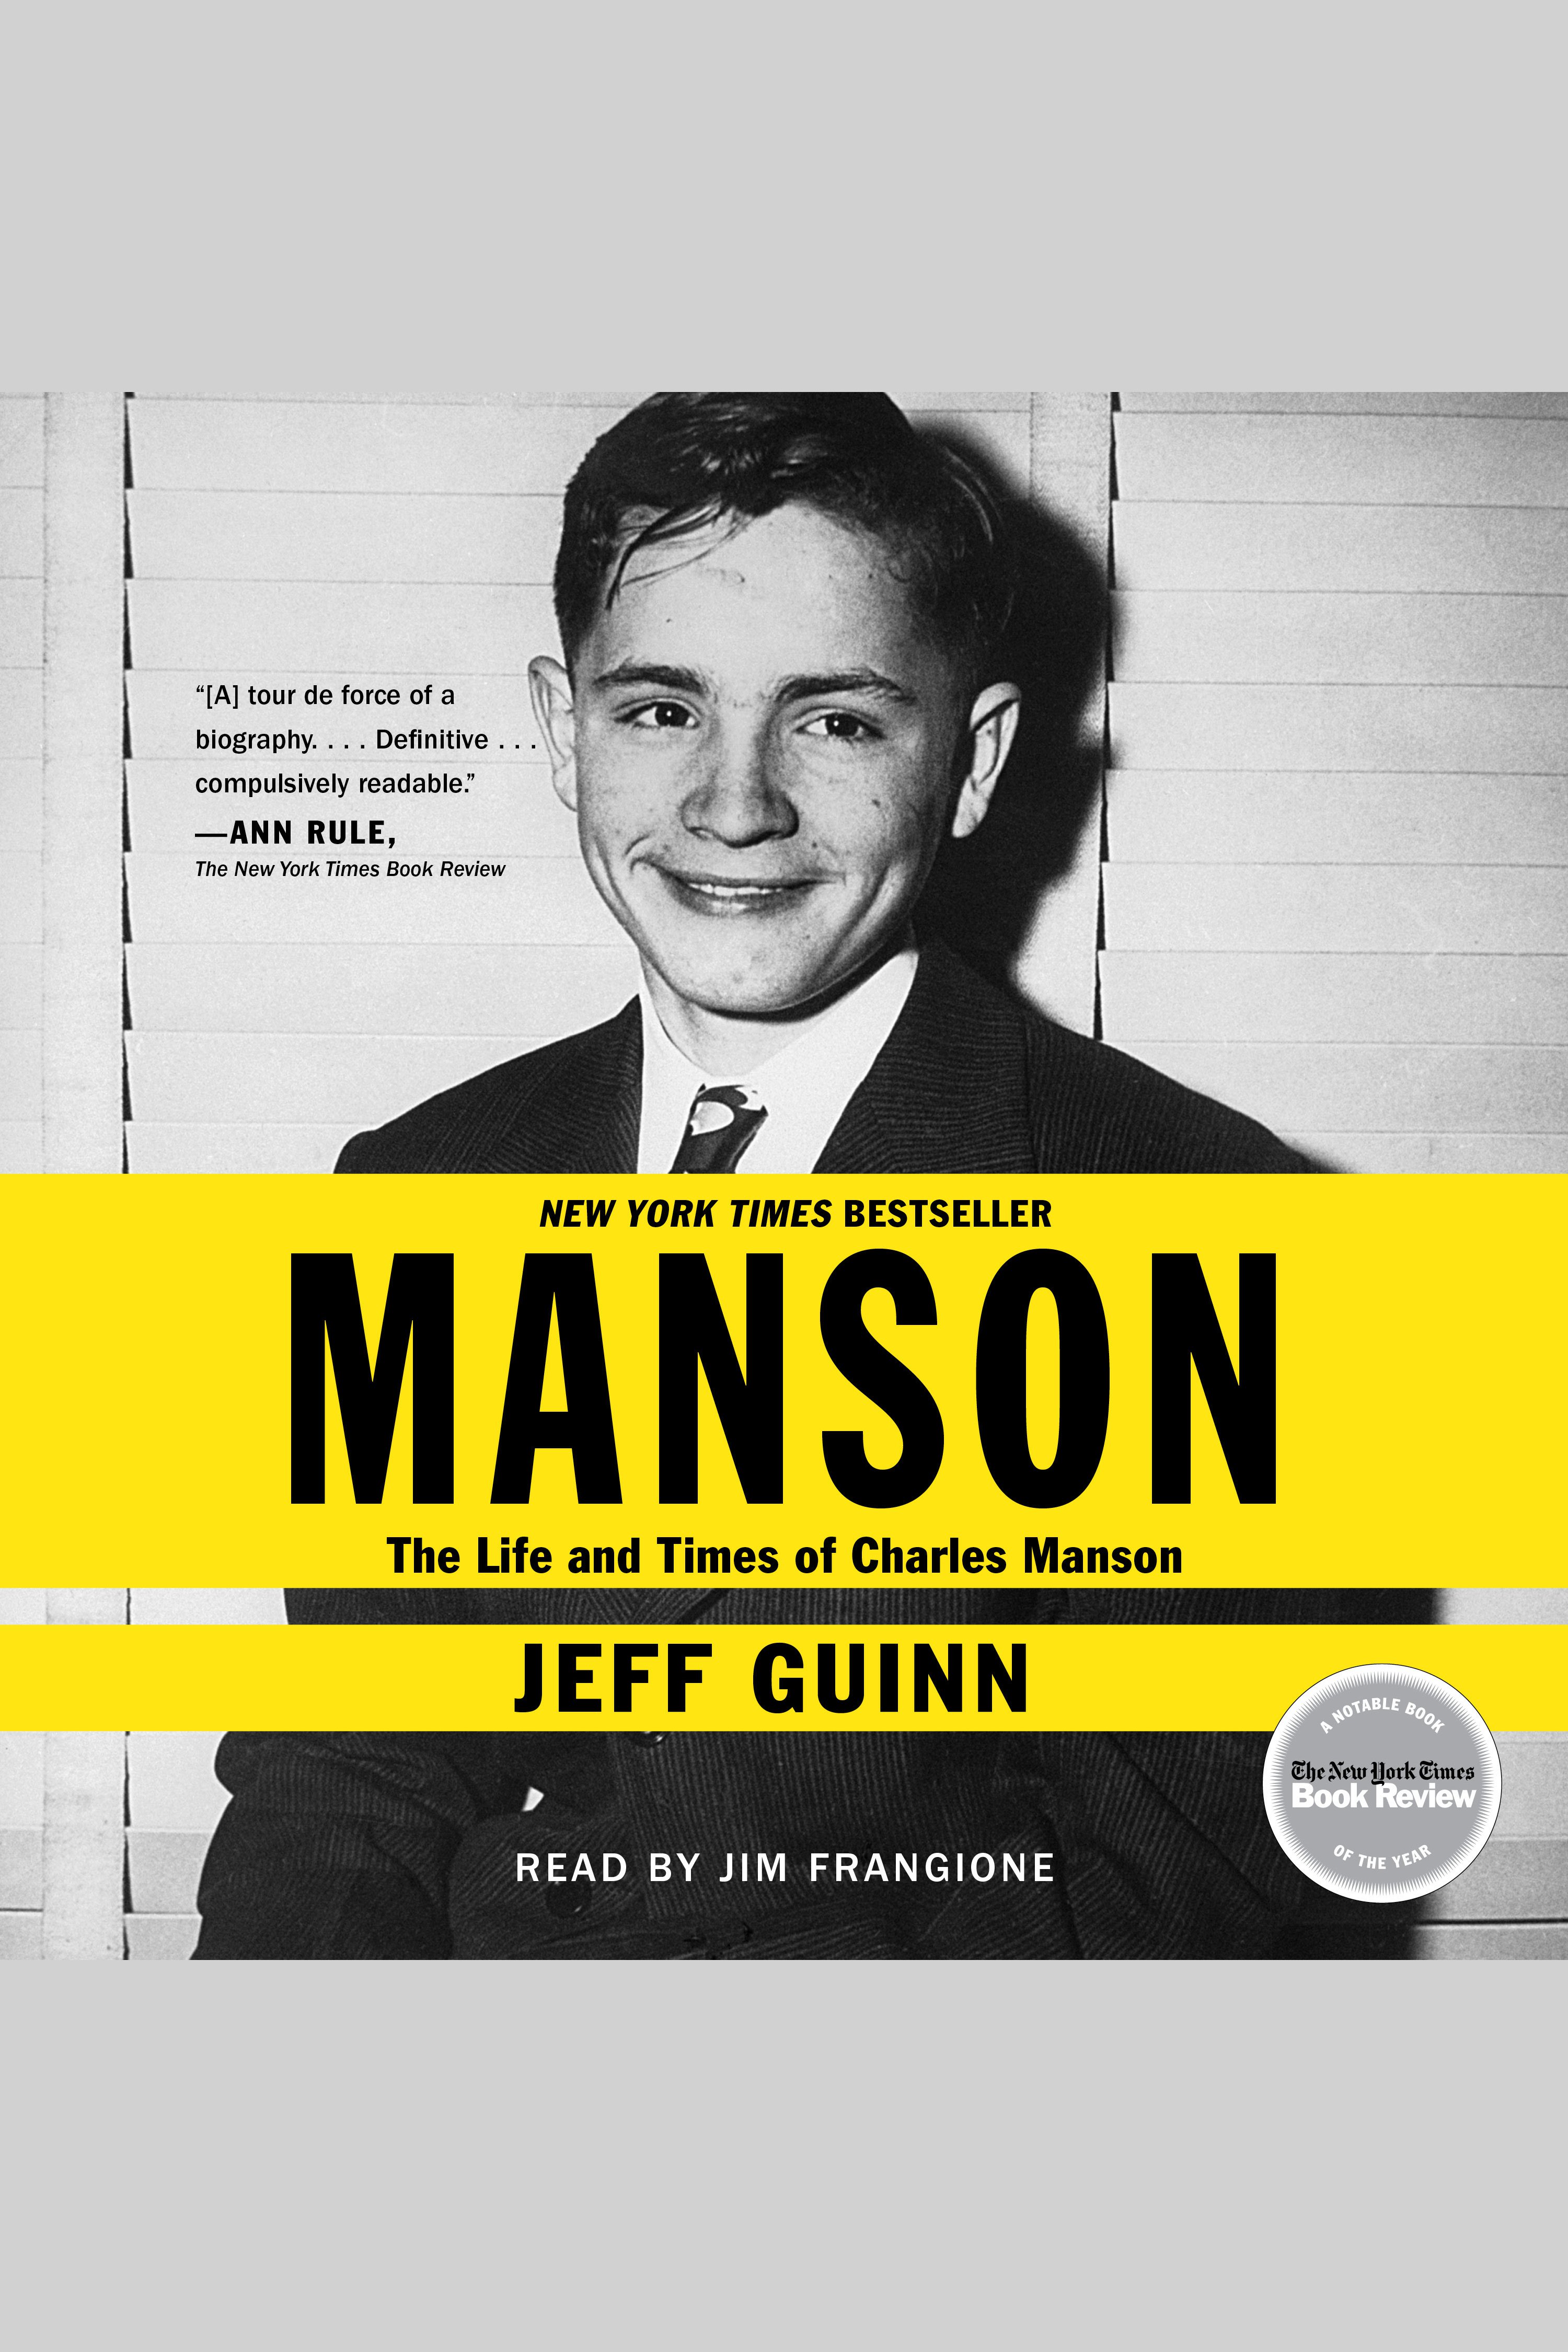 Image de couverture de Manson [electronic resource] : The Life and Times of Charles Manson